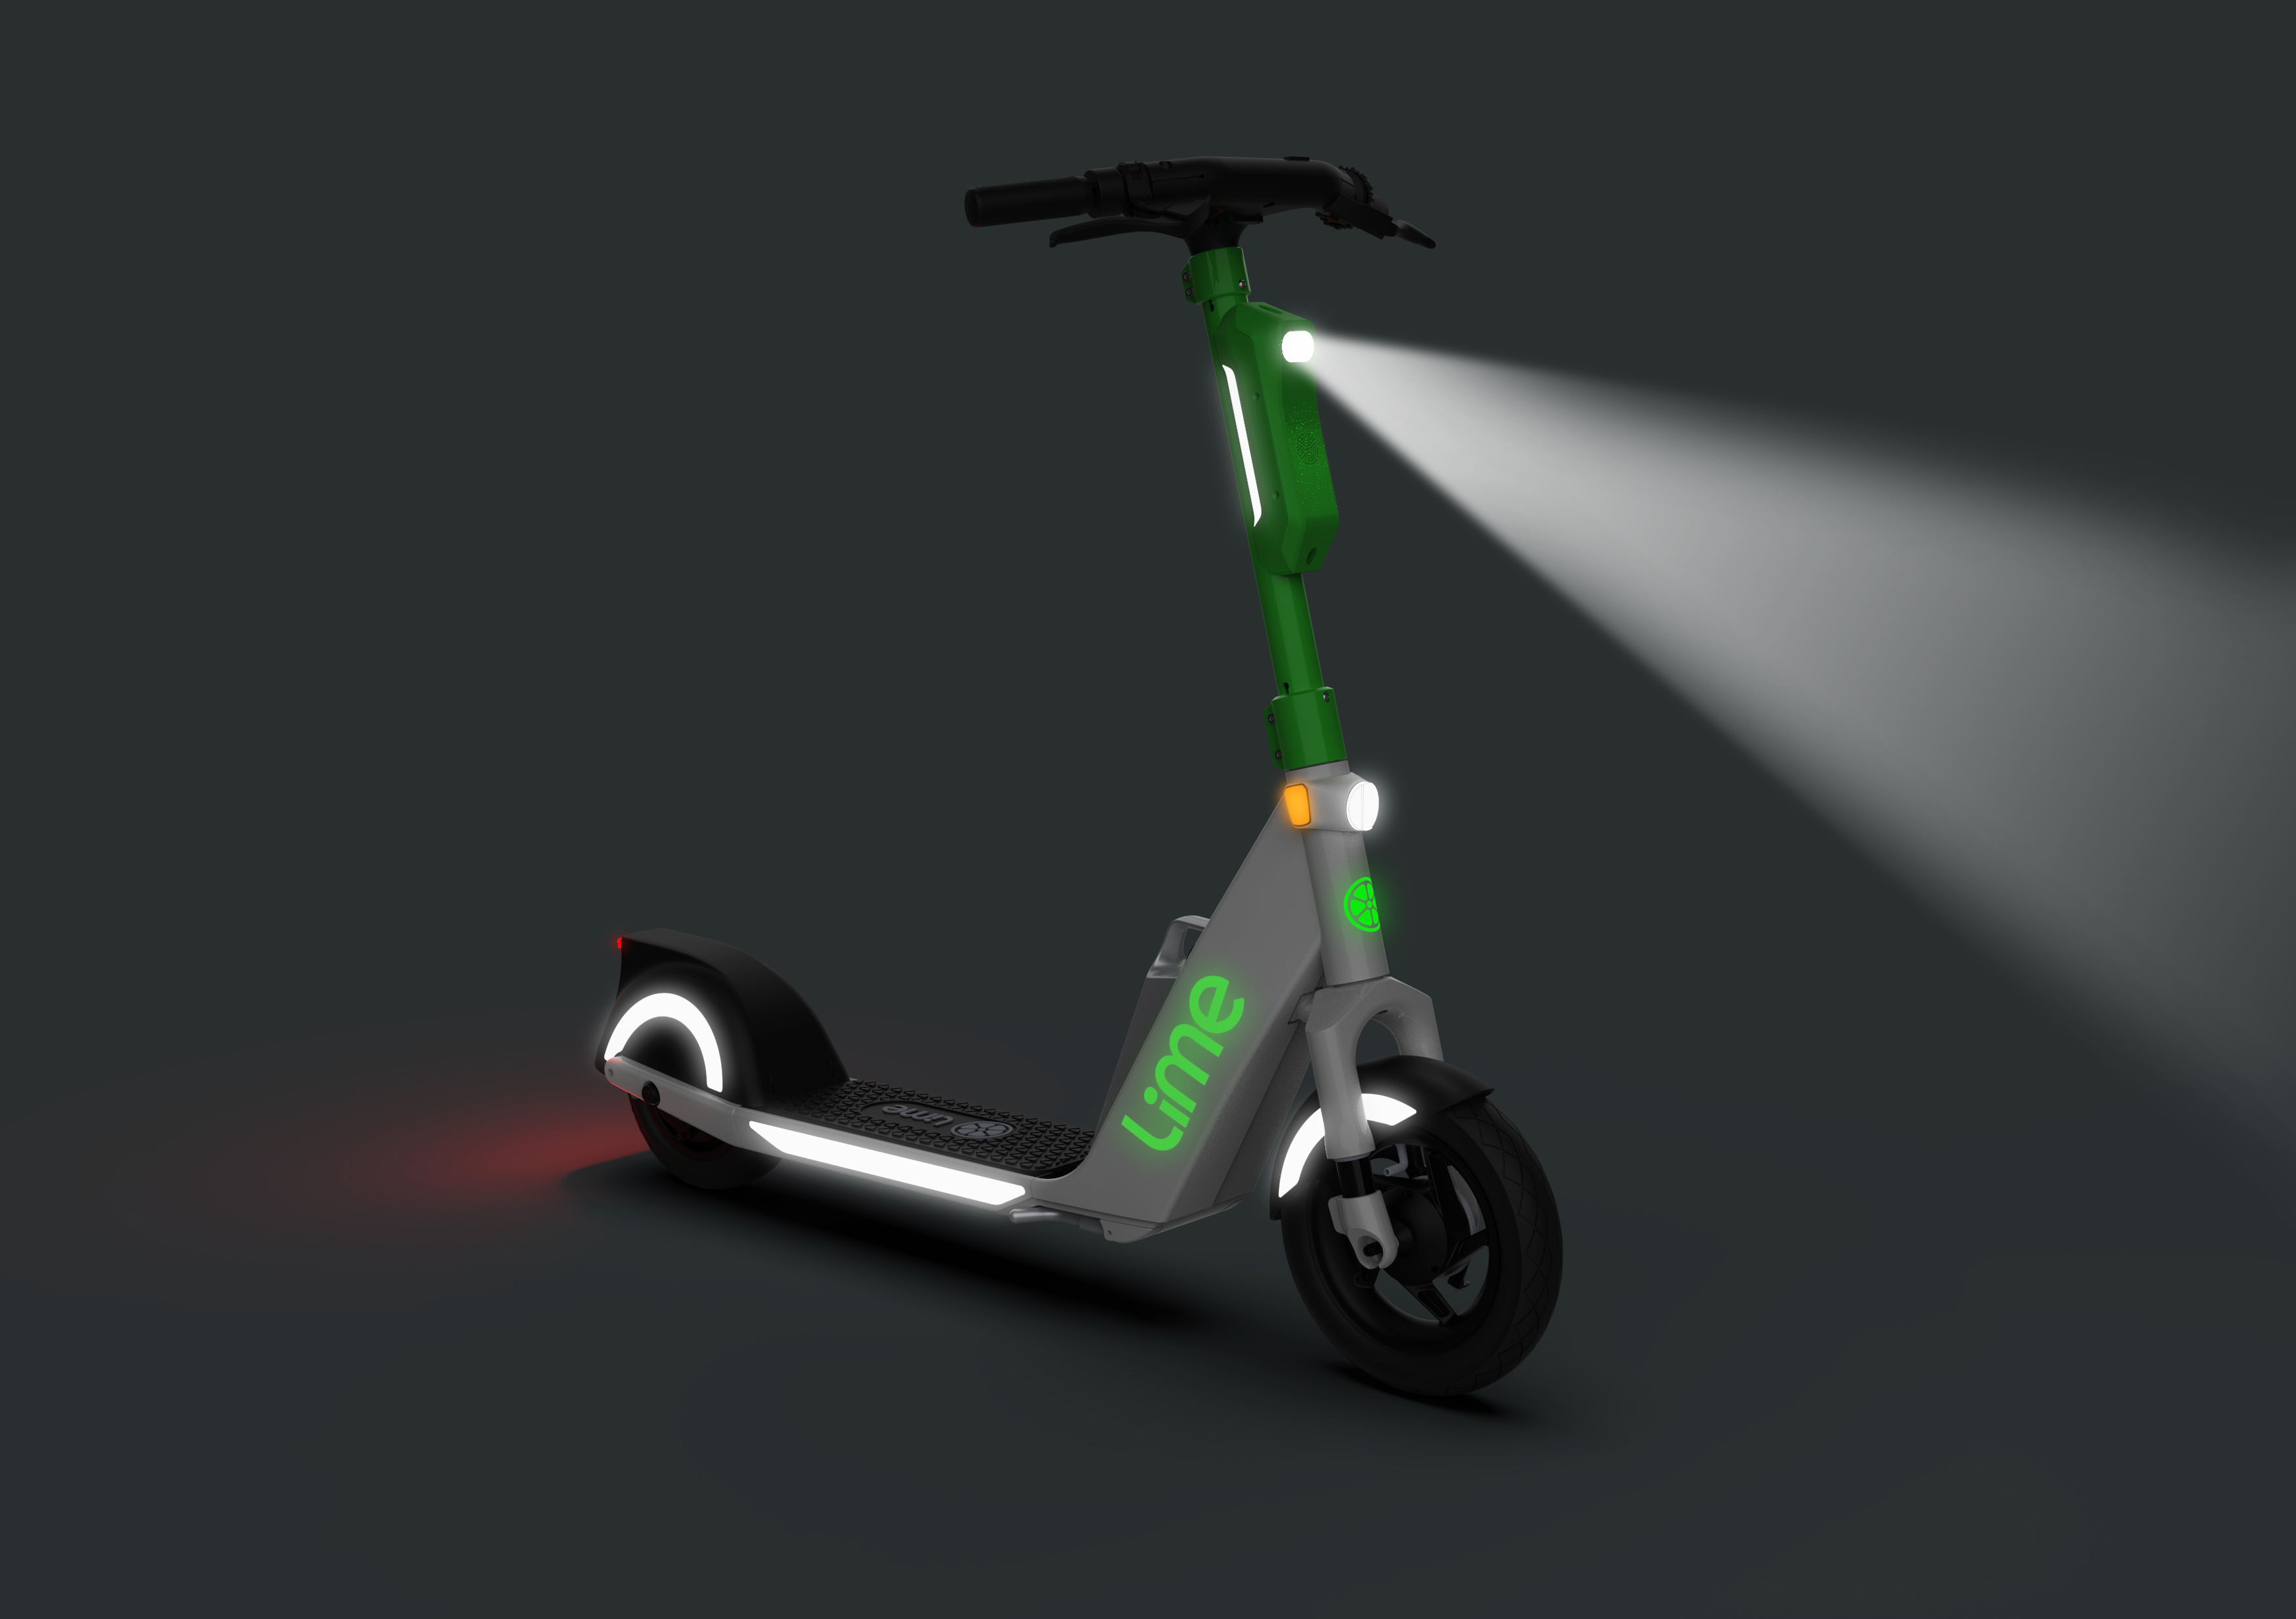 Lime plans for 'modes' beyond scooters in 2021 | TechCrunch